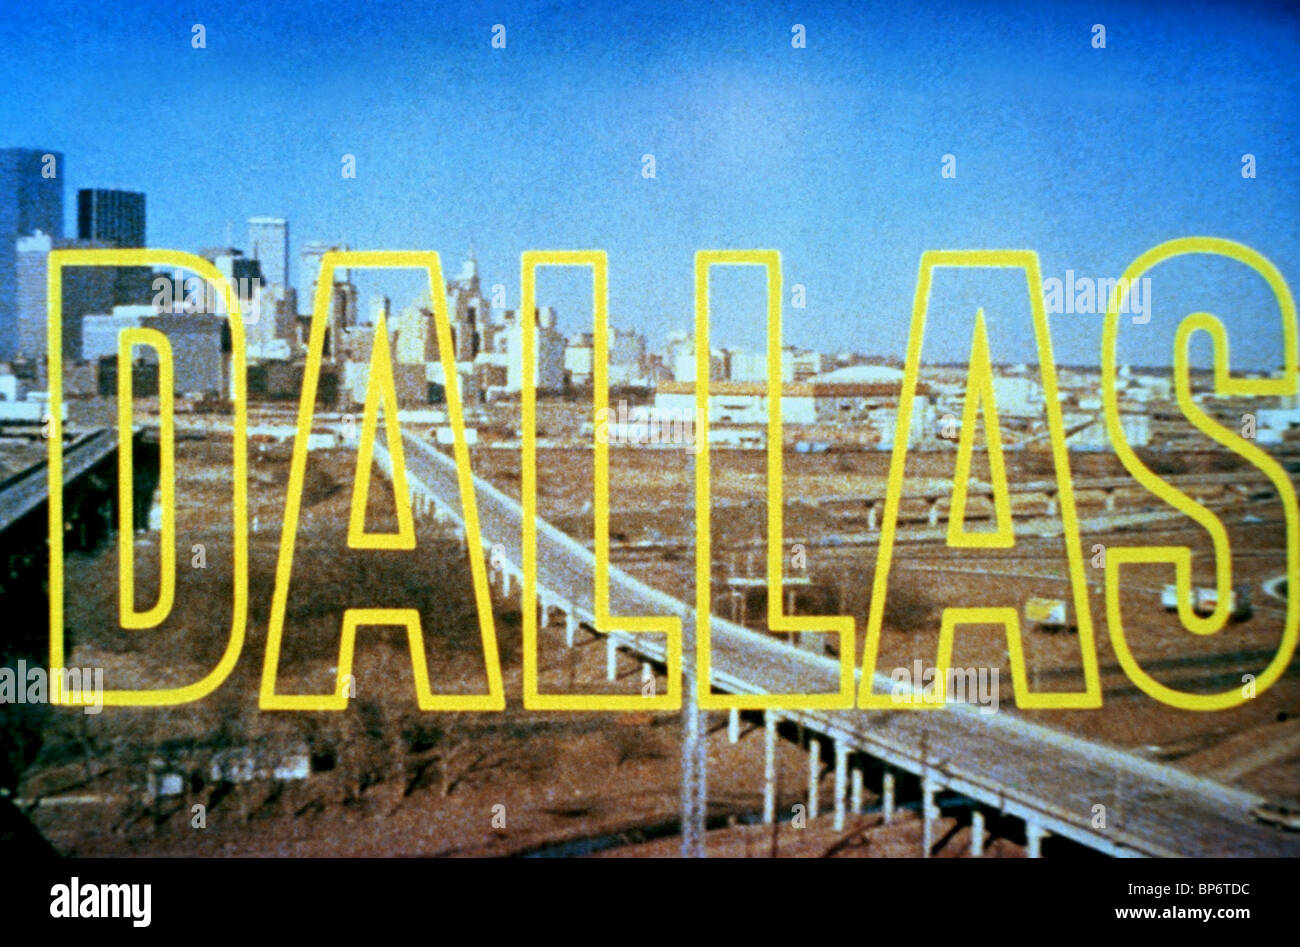 Dallas Tv Series High Resolution Stock Photography and Images - Alamy